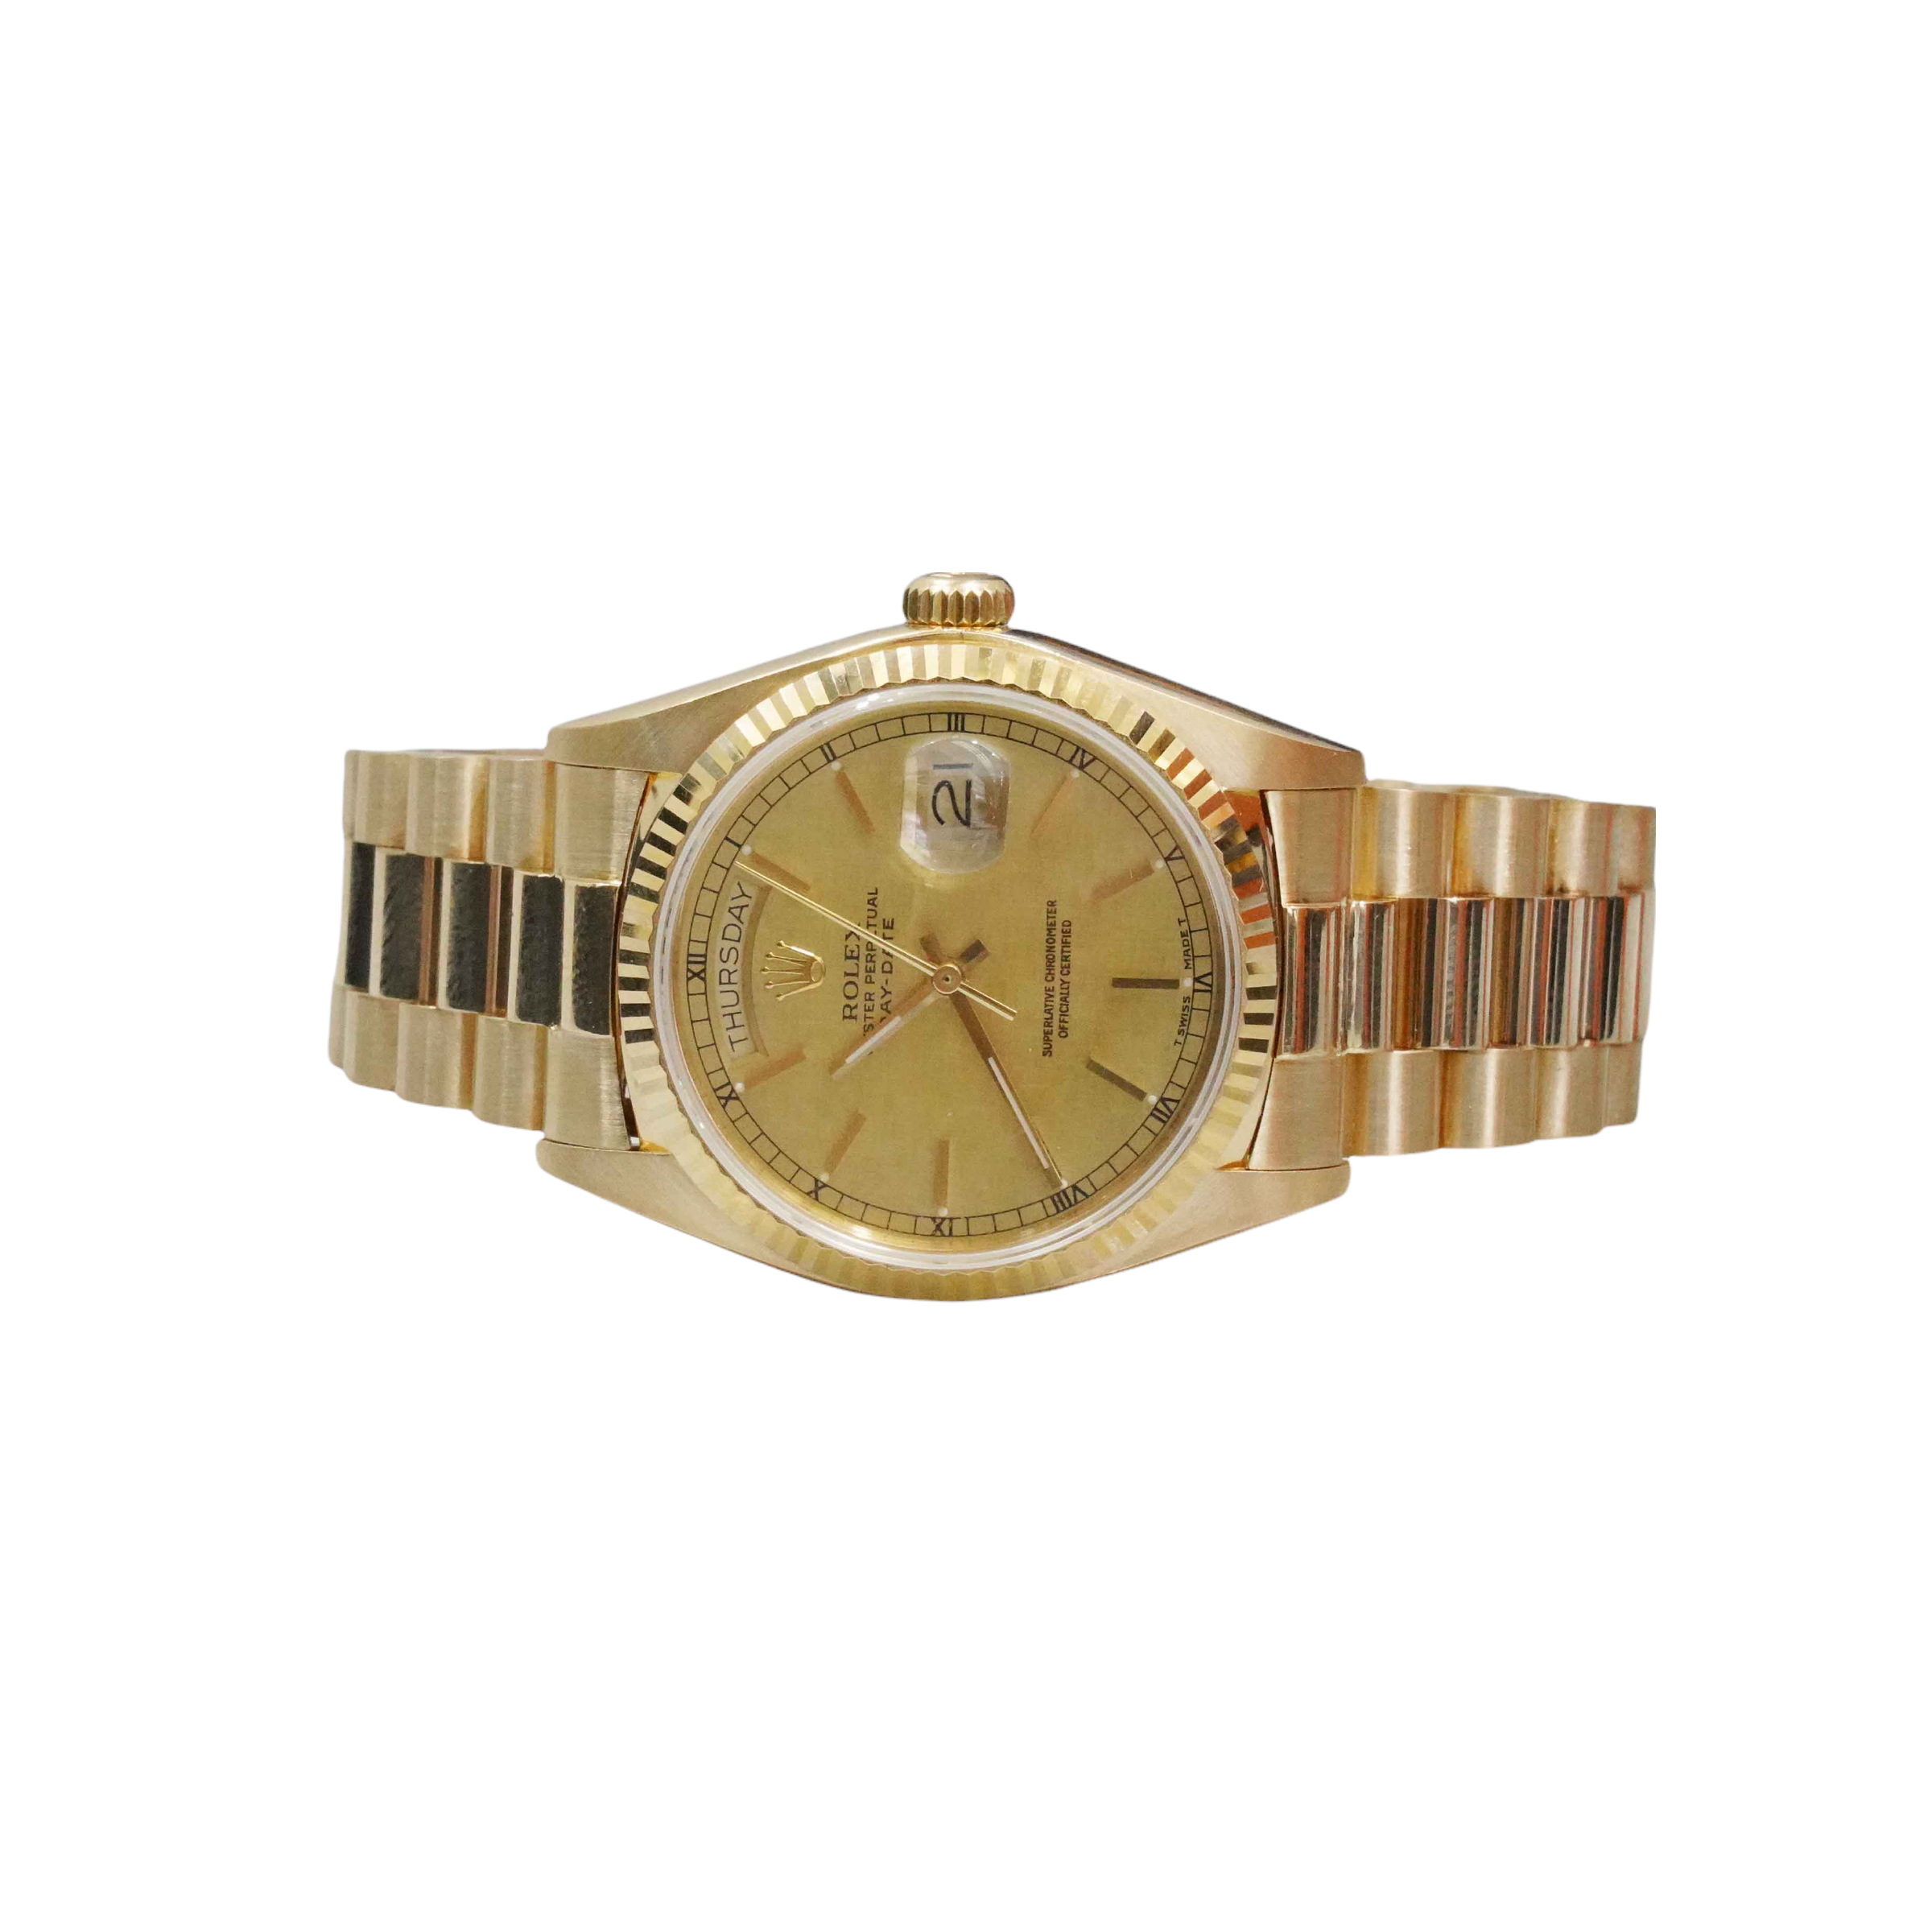 Rolex Day Date President watch Champagne Dial 36mm 118238